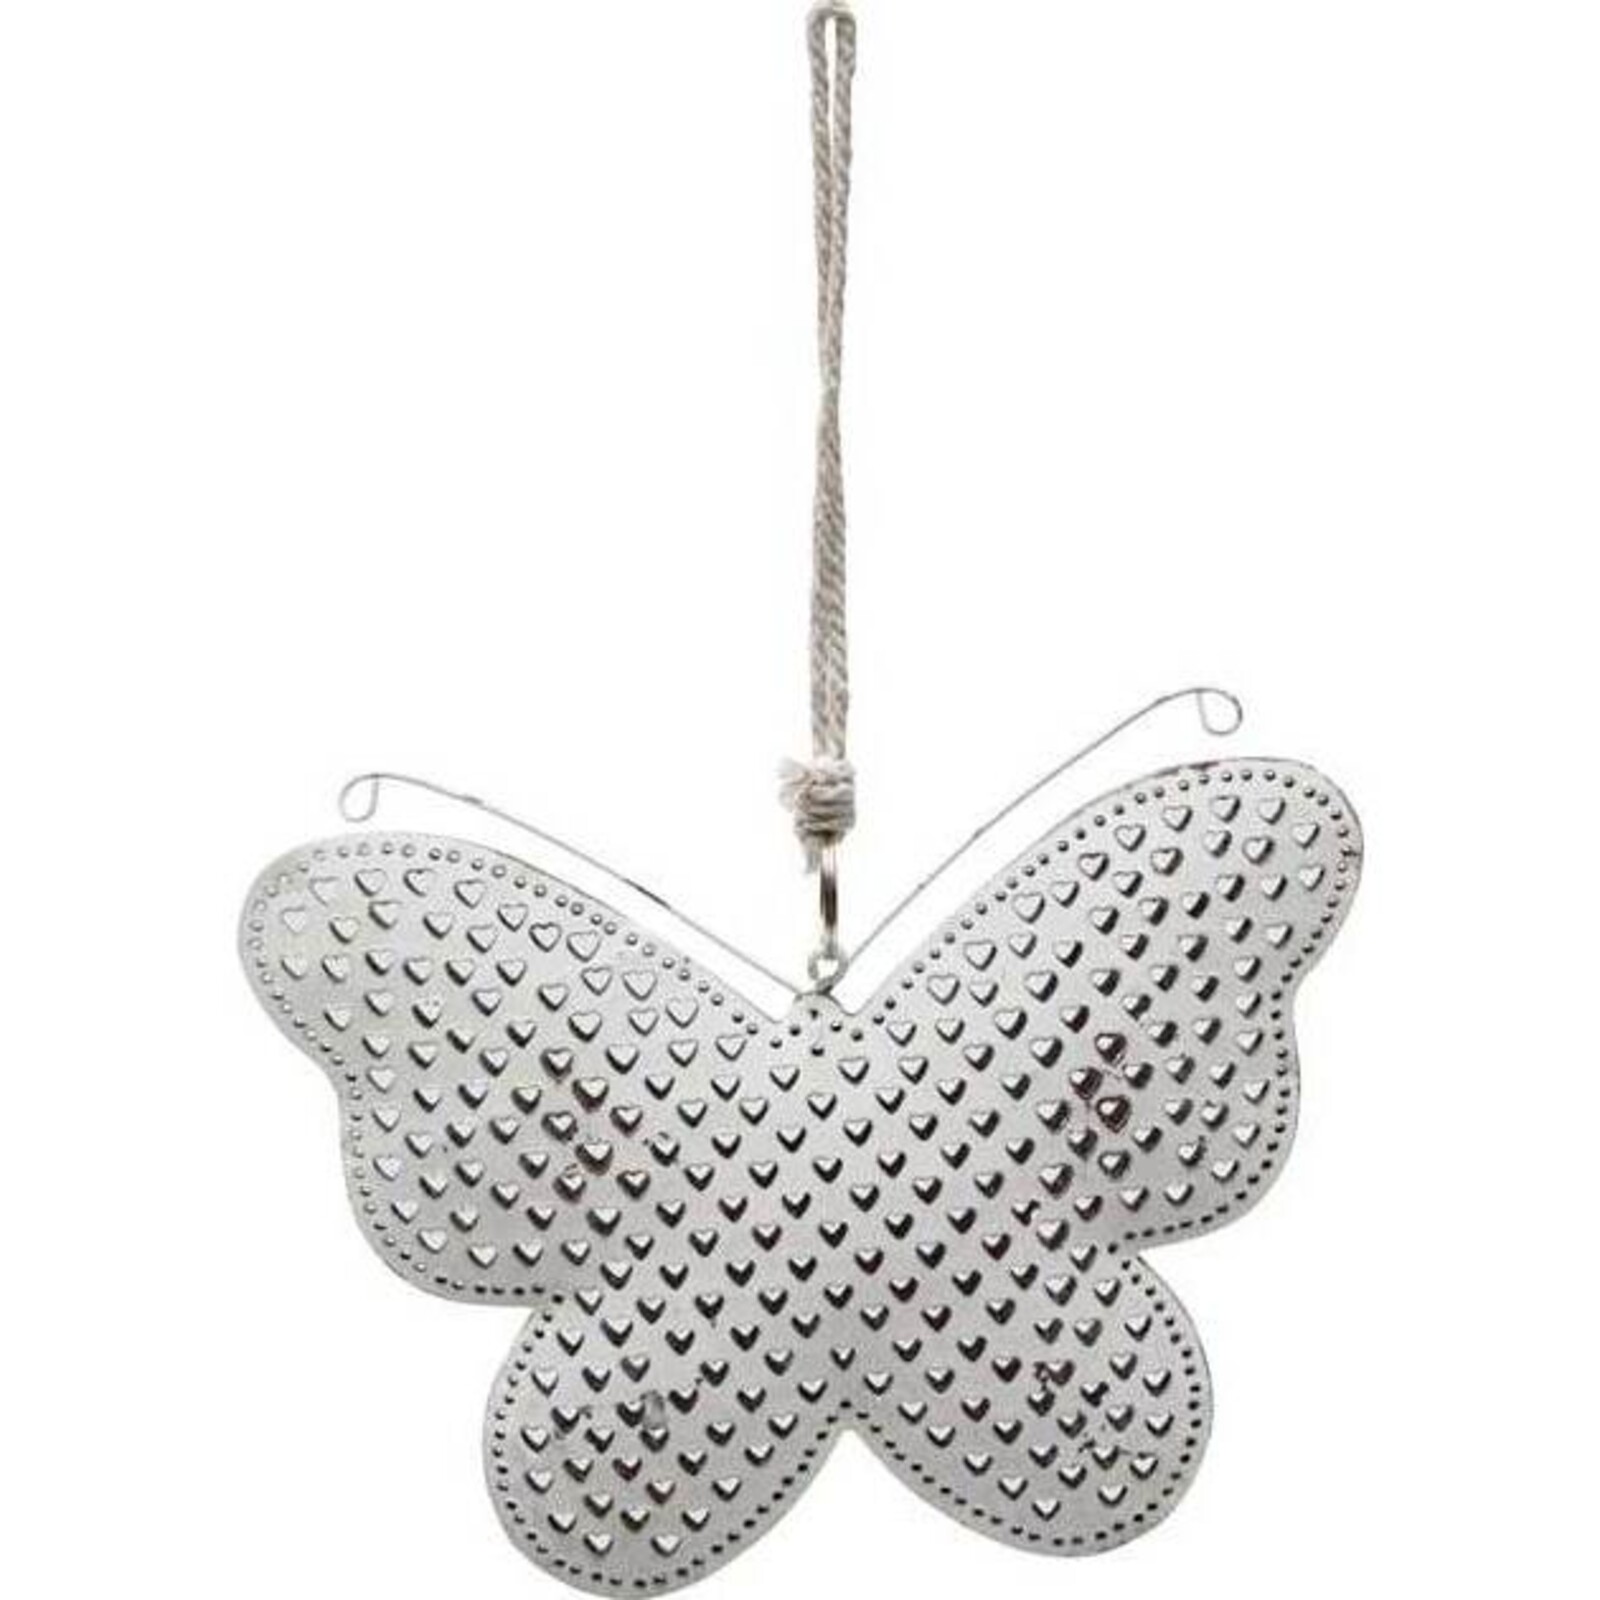 Hanging Butterfly Cutout